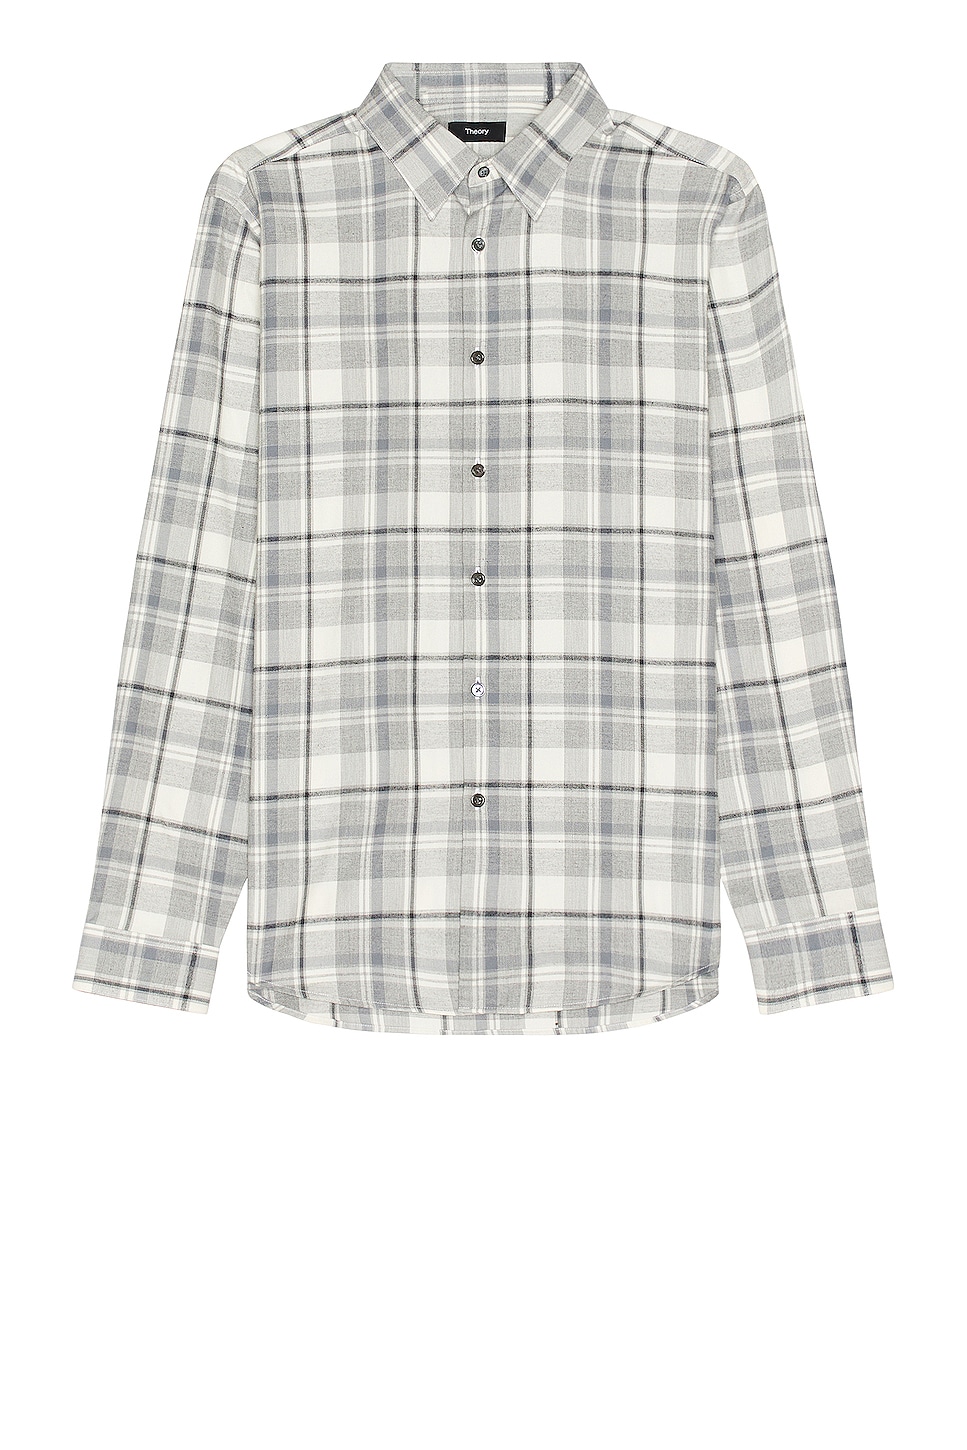 Image 1 of Theory Irving Medium Plaid Woven Shirt in Ivory Multi